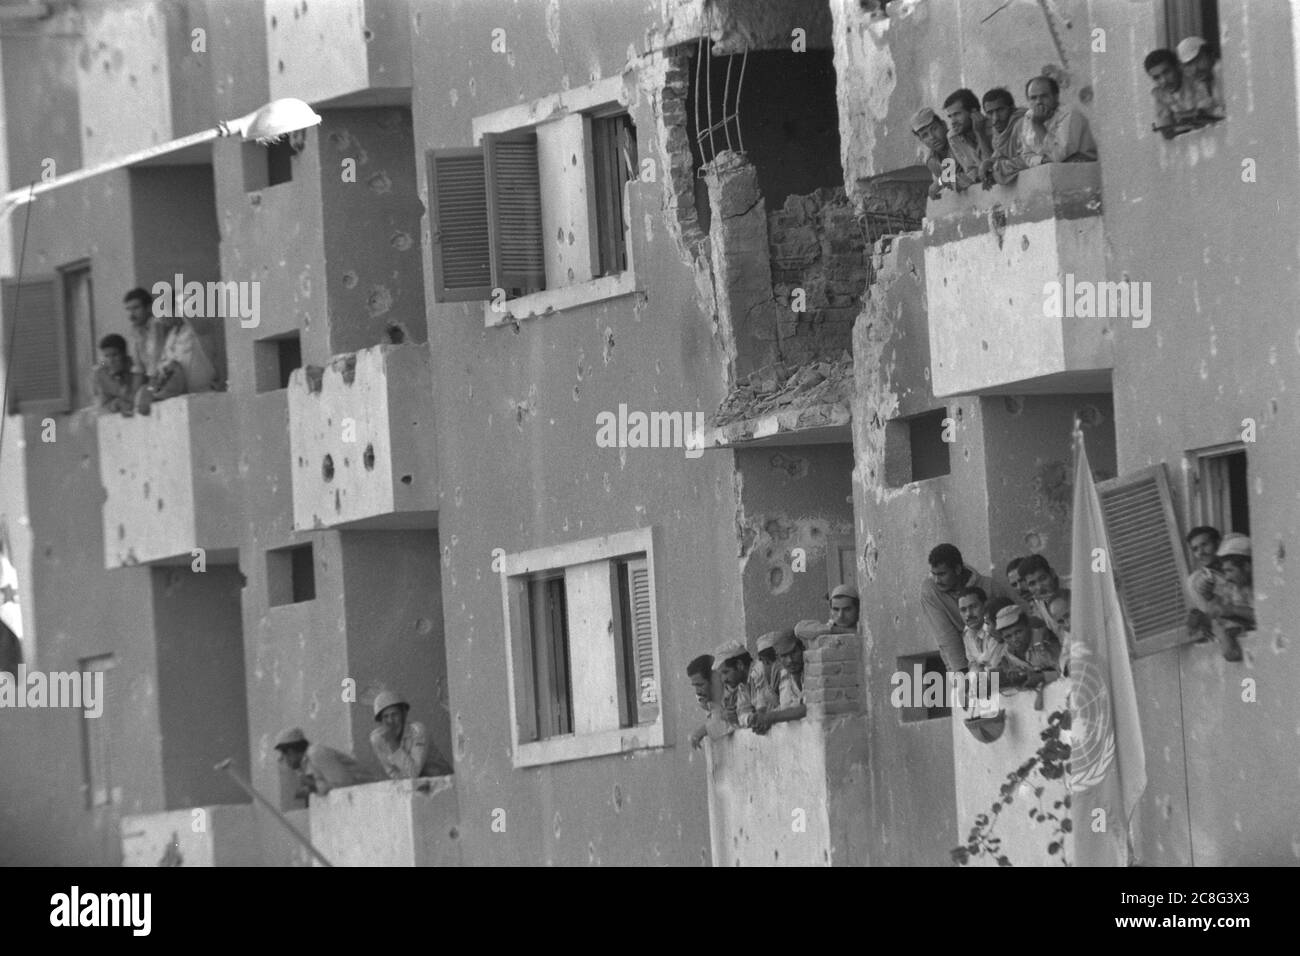 Egyptian soldiers, look out of windows, buildings on the outskirts of Suez, bullet holes can be seen in the house wall, during the Yom Kippur war, the Yom Kippur war between Israel and the Arab states Egypt, Jordan and Syria lasted from the 6th October to October 25, 1973, | usage worldwide Stock Photo